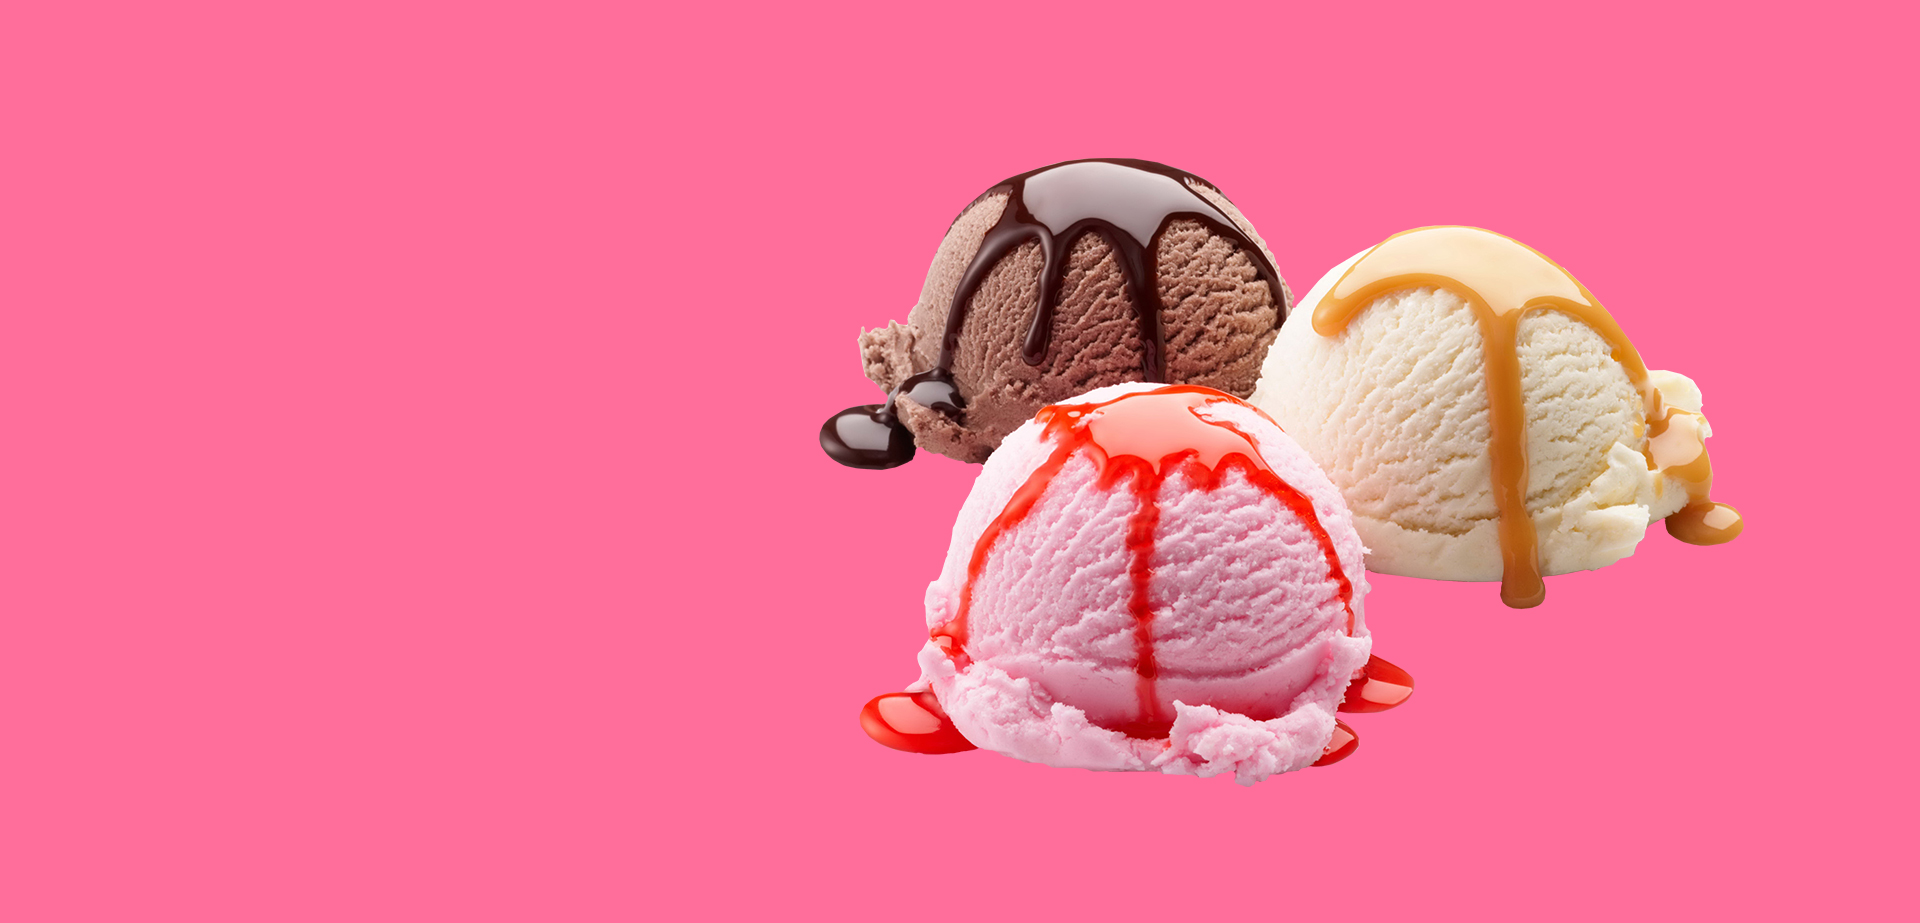 Share Your Love with ice-scoop